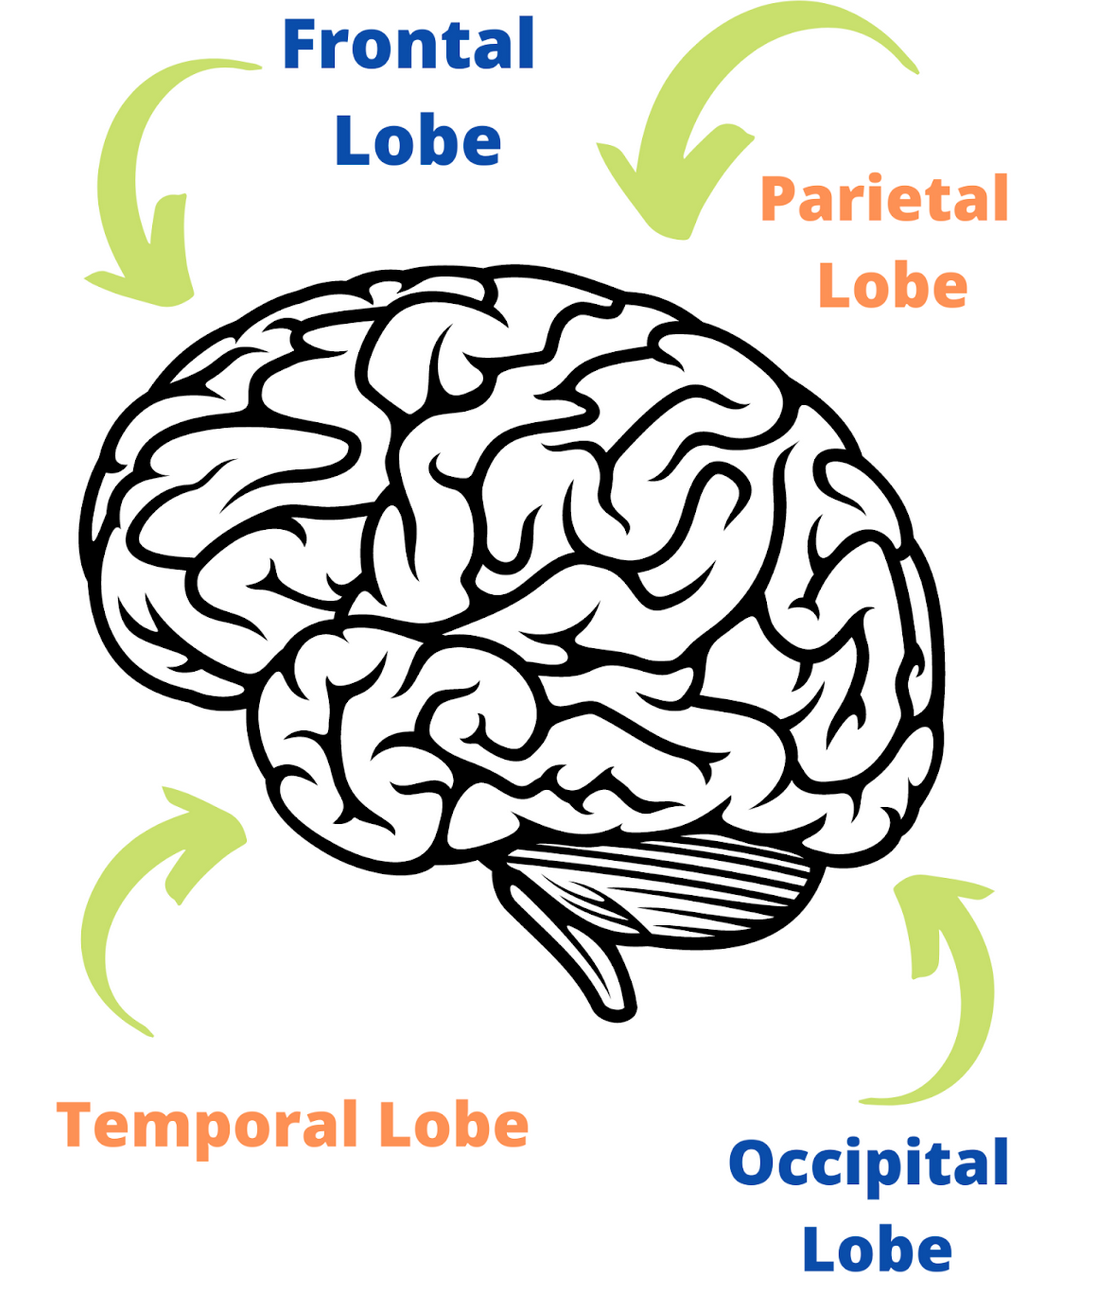 Graphic labeling the lobes of the brain